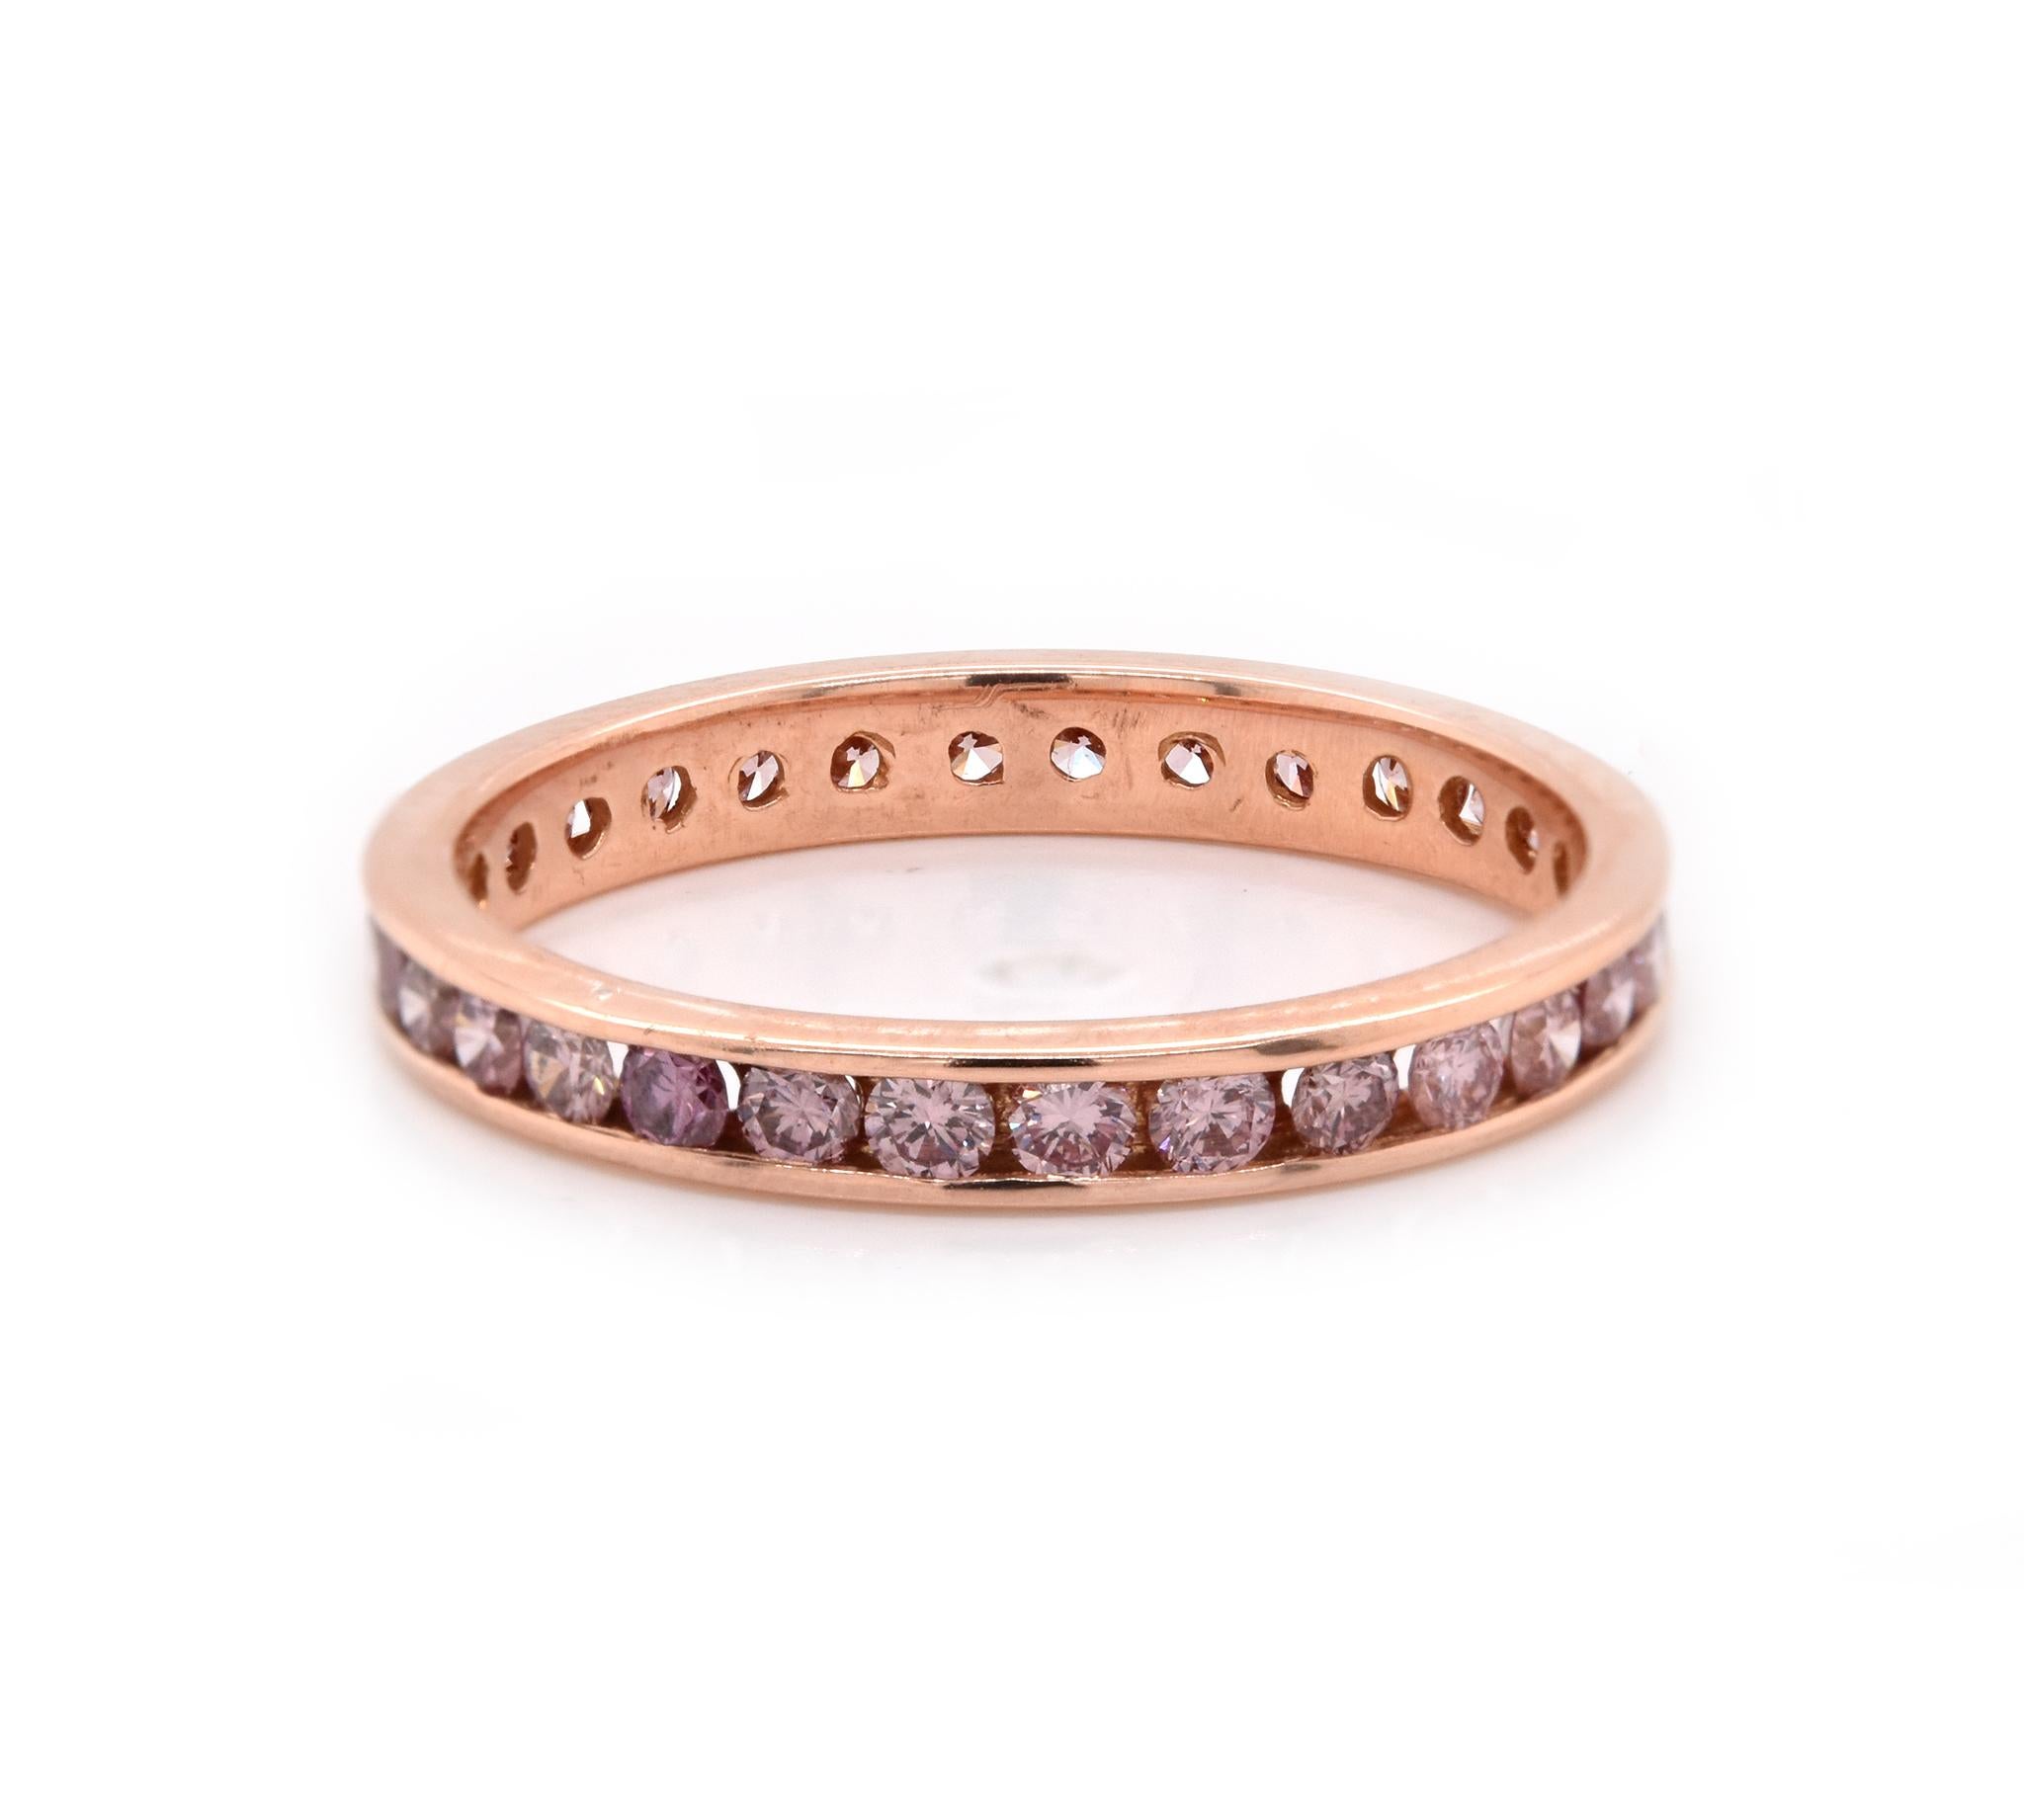 Designer: Custom
Material: 18K rose gold
Diamonds: 30 round cut = .90cttw 
Color: Pink
Clarity: SI1
Size: 6.75
Dimensions: ring measures 2.9mm in width
Weight: 2.00 grams
